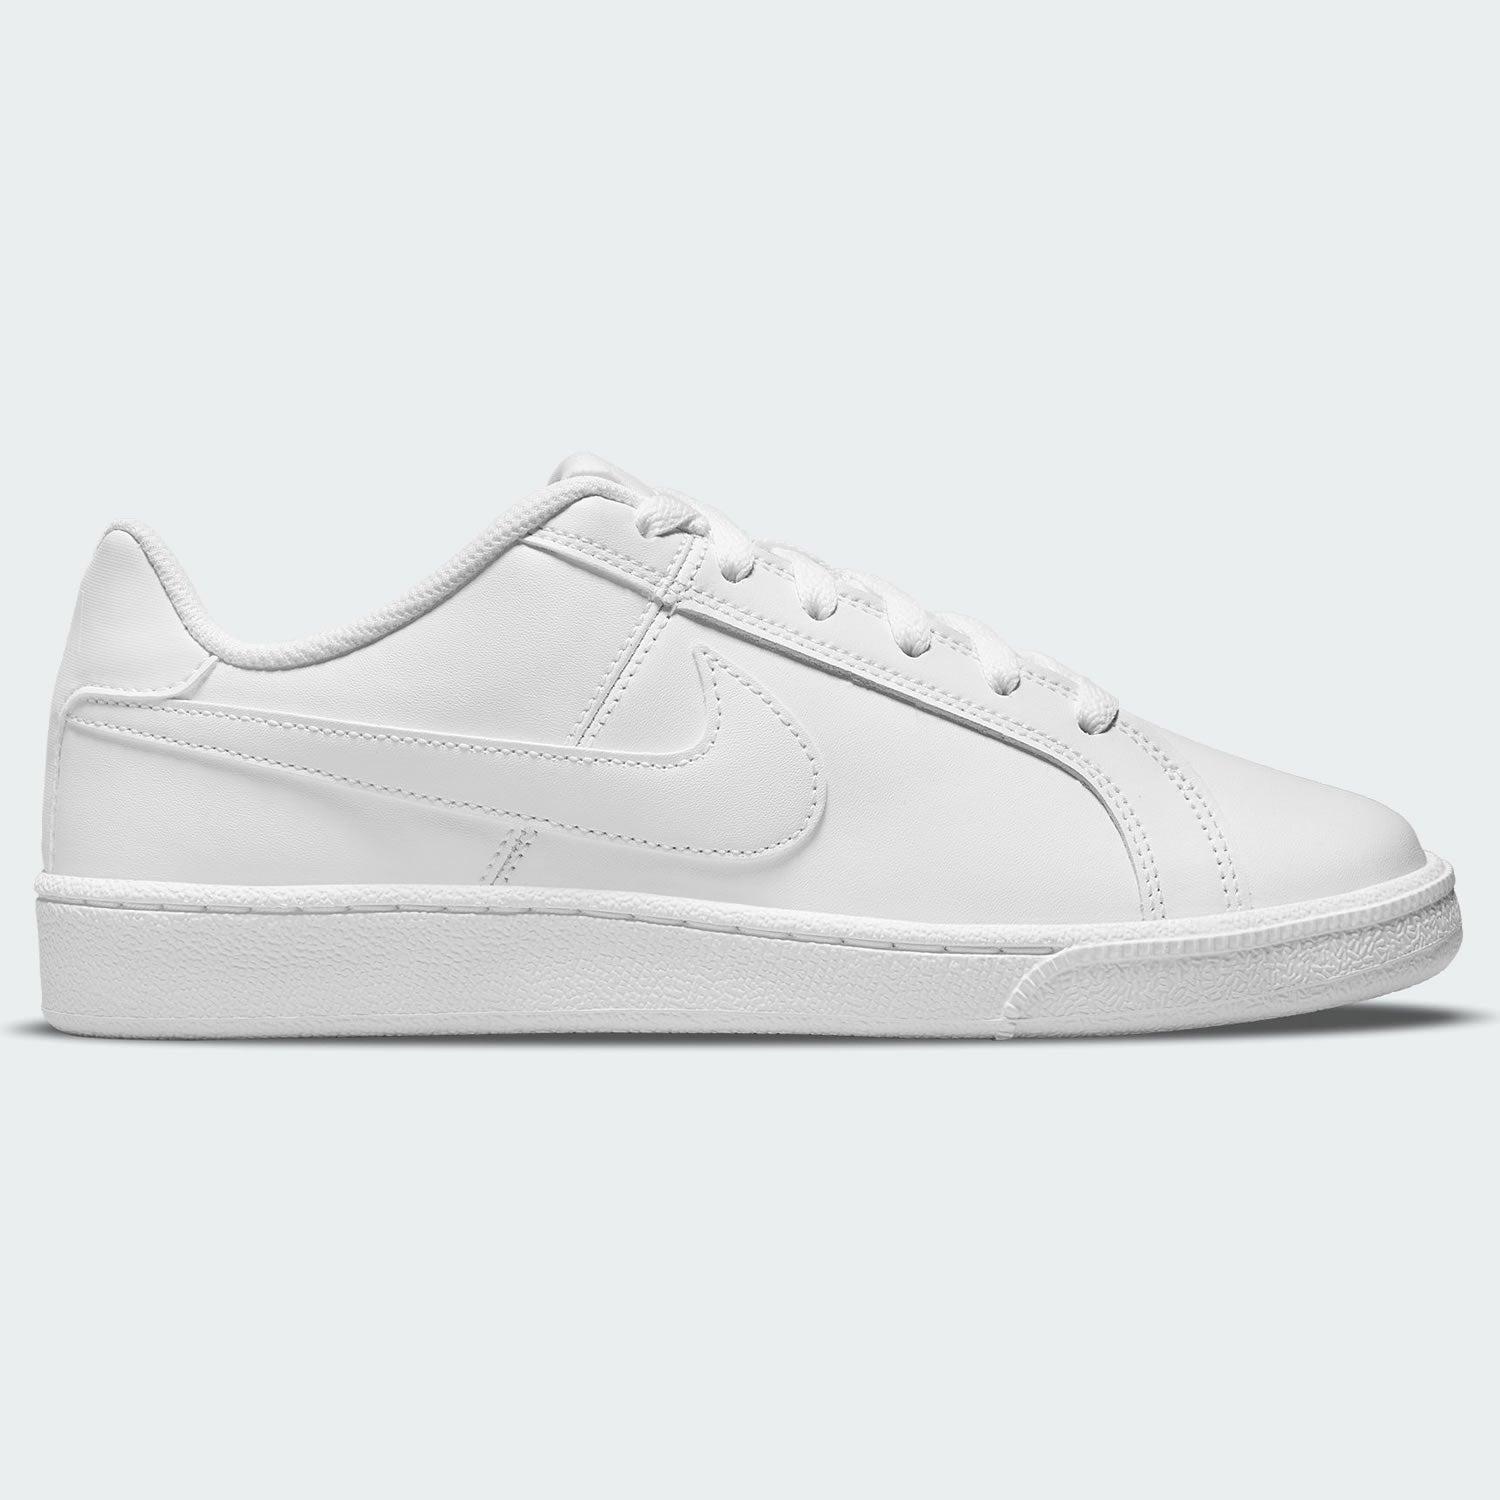 Nike Women's Court Royale 2 Shoes - Trade Sports